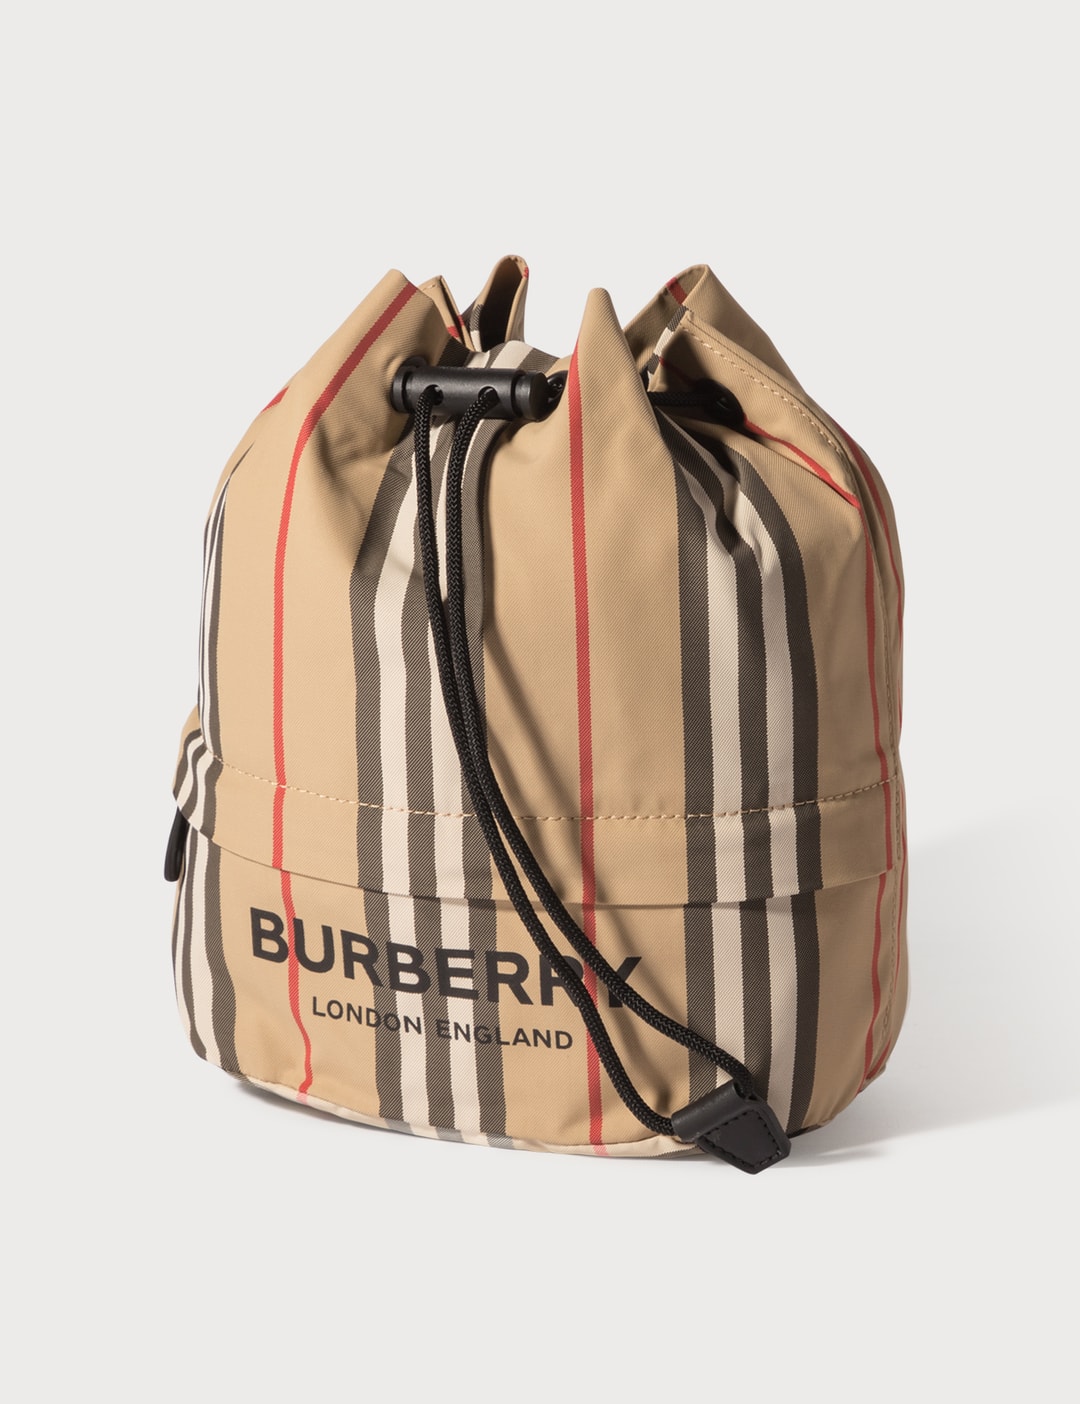 Tote Bags  HBX - Globally Curated Fashion and Lifestyle by Hypebeast